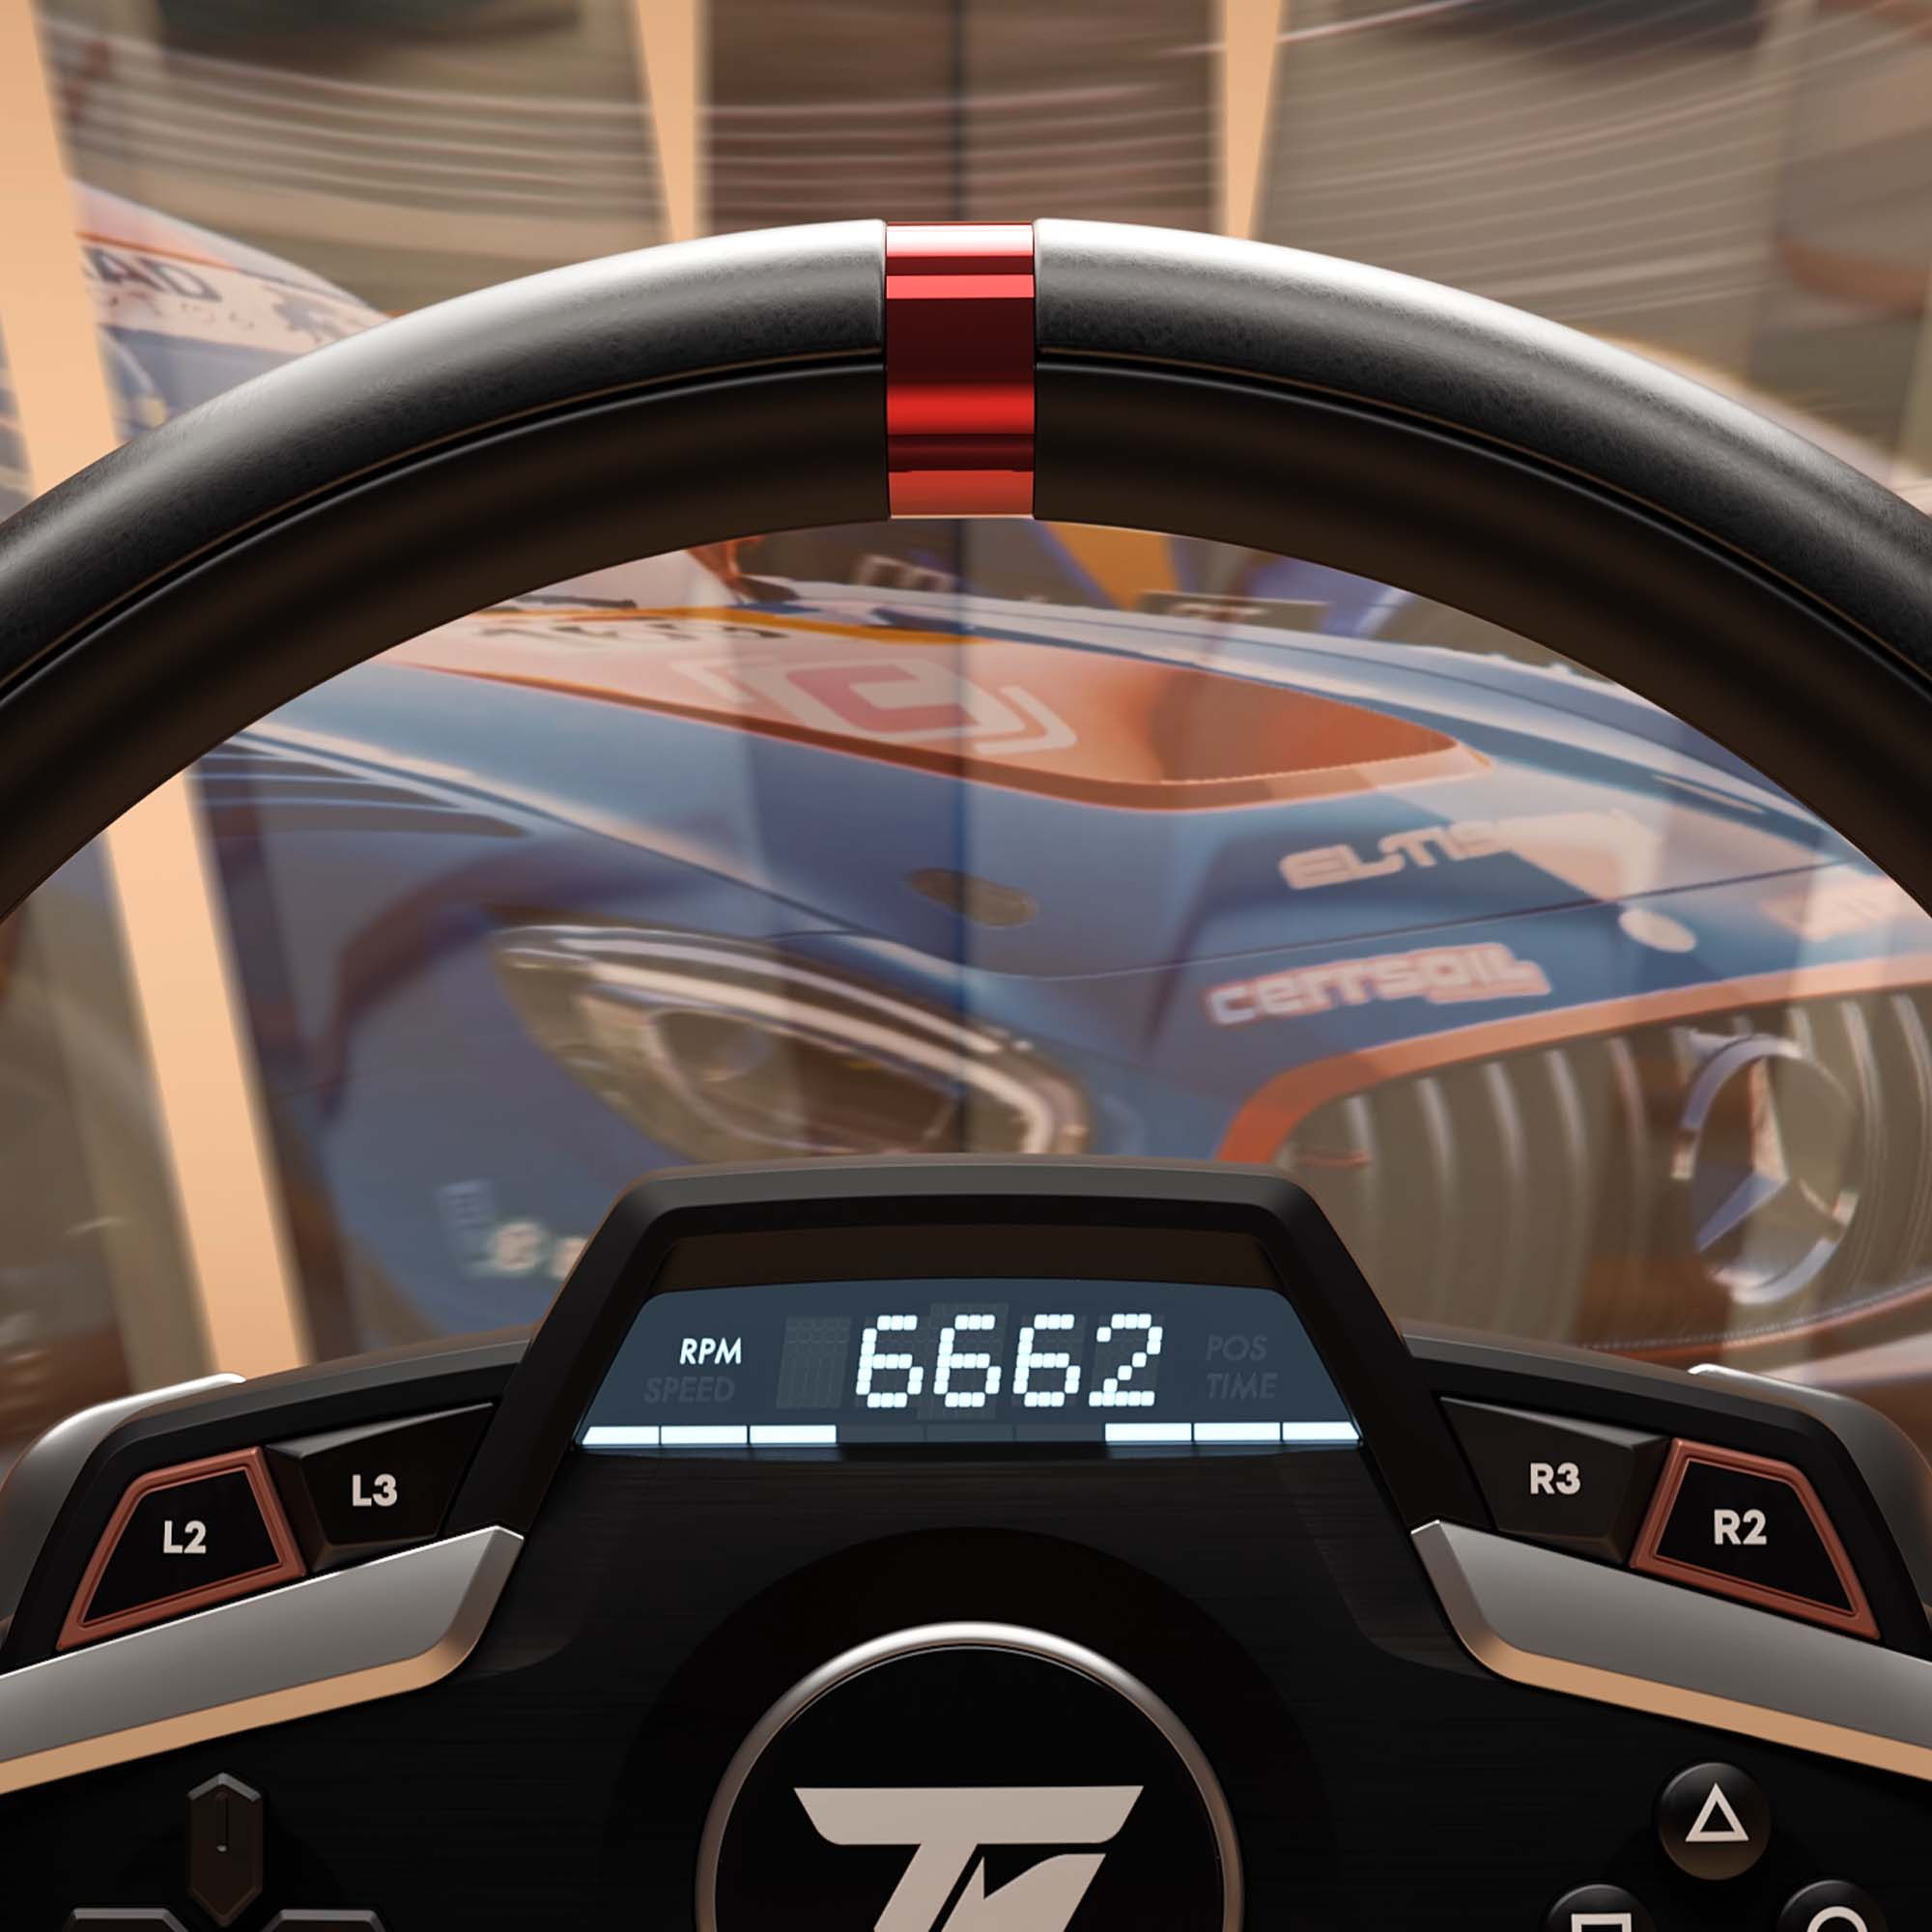 Volant Thrustmaster Wheels PS5 - What Volant PS5 Wheels Are Available? -  PlayStation Universe